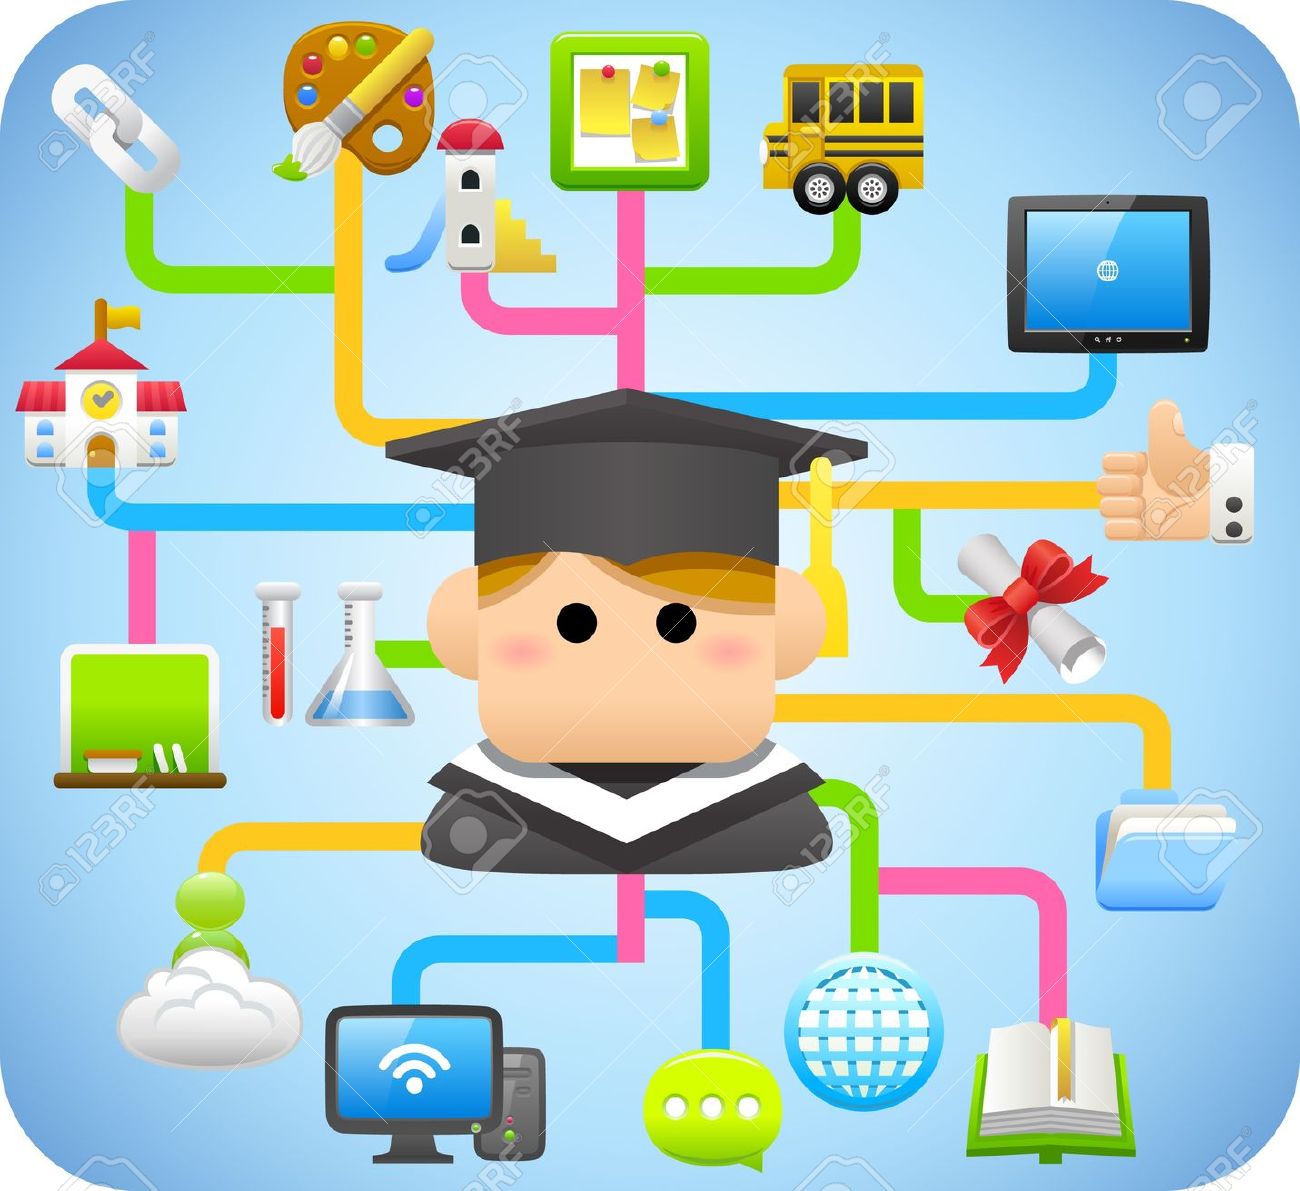 business technology clipart - photo #7